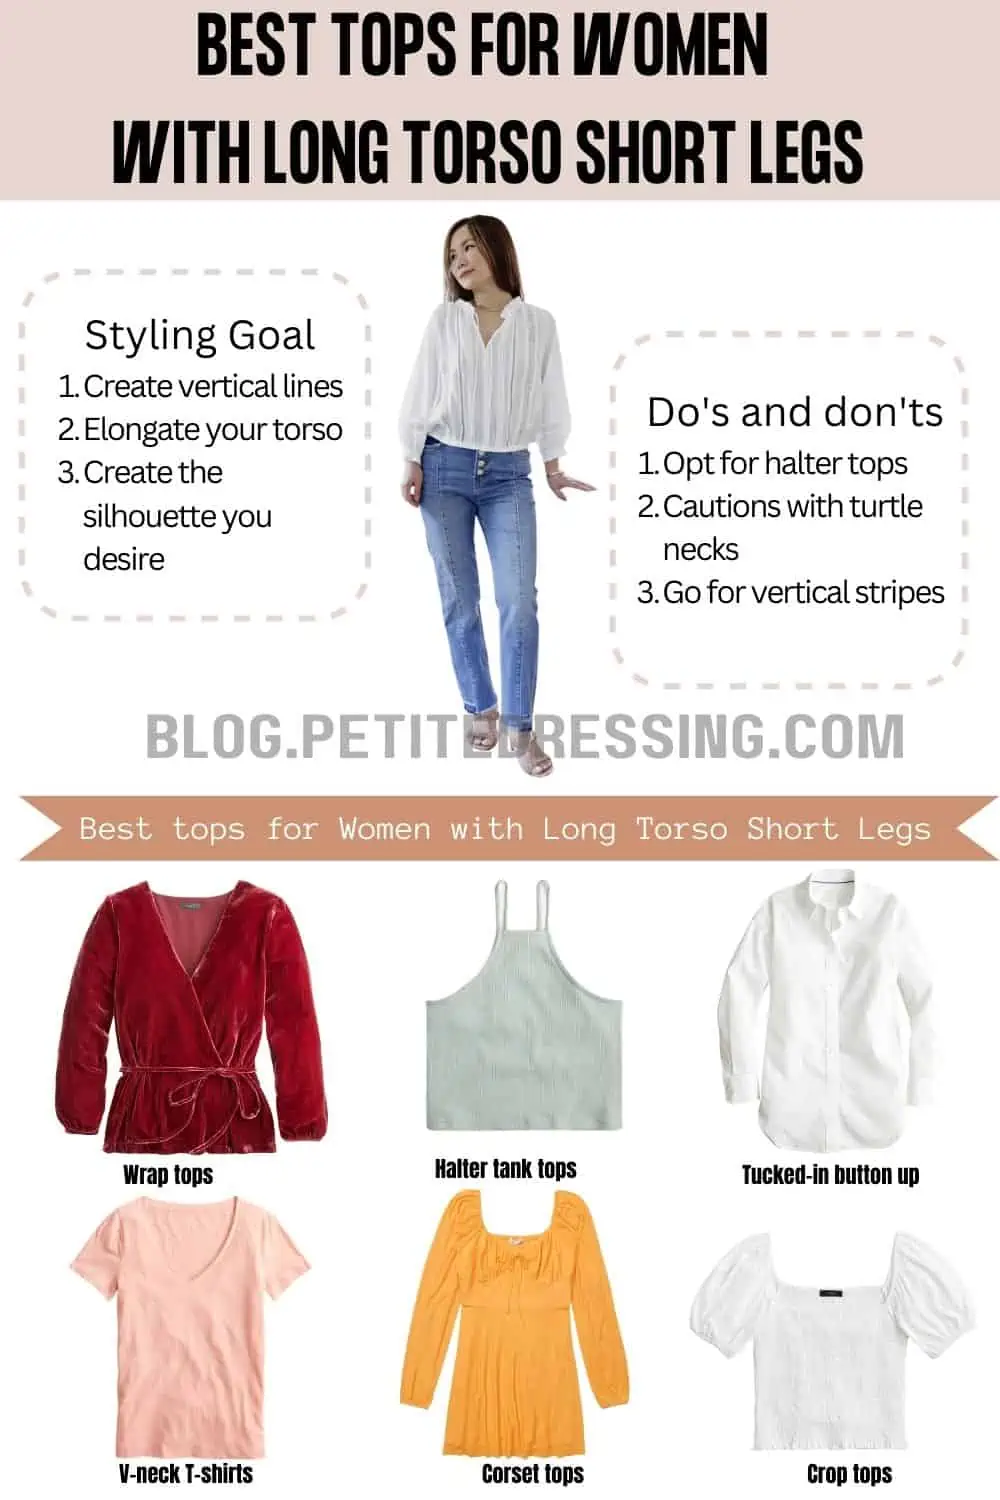 HOW TO STYLE SHORT LEGS & LONG TORSO 